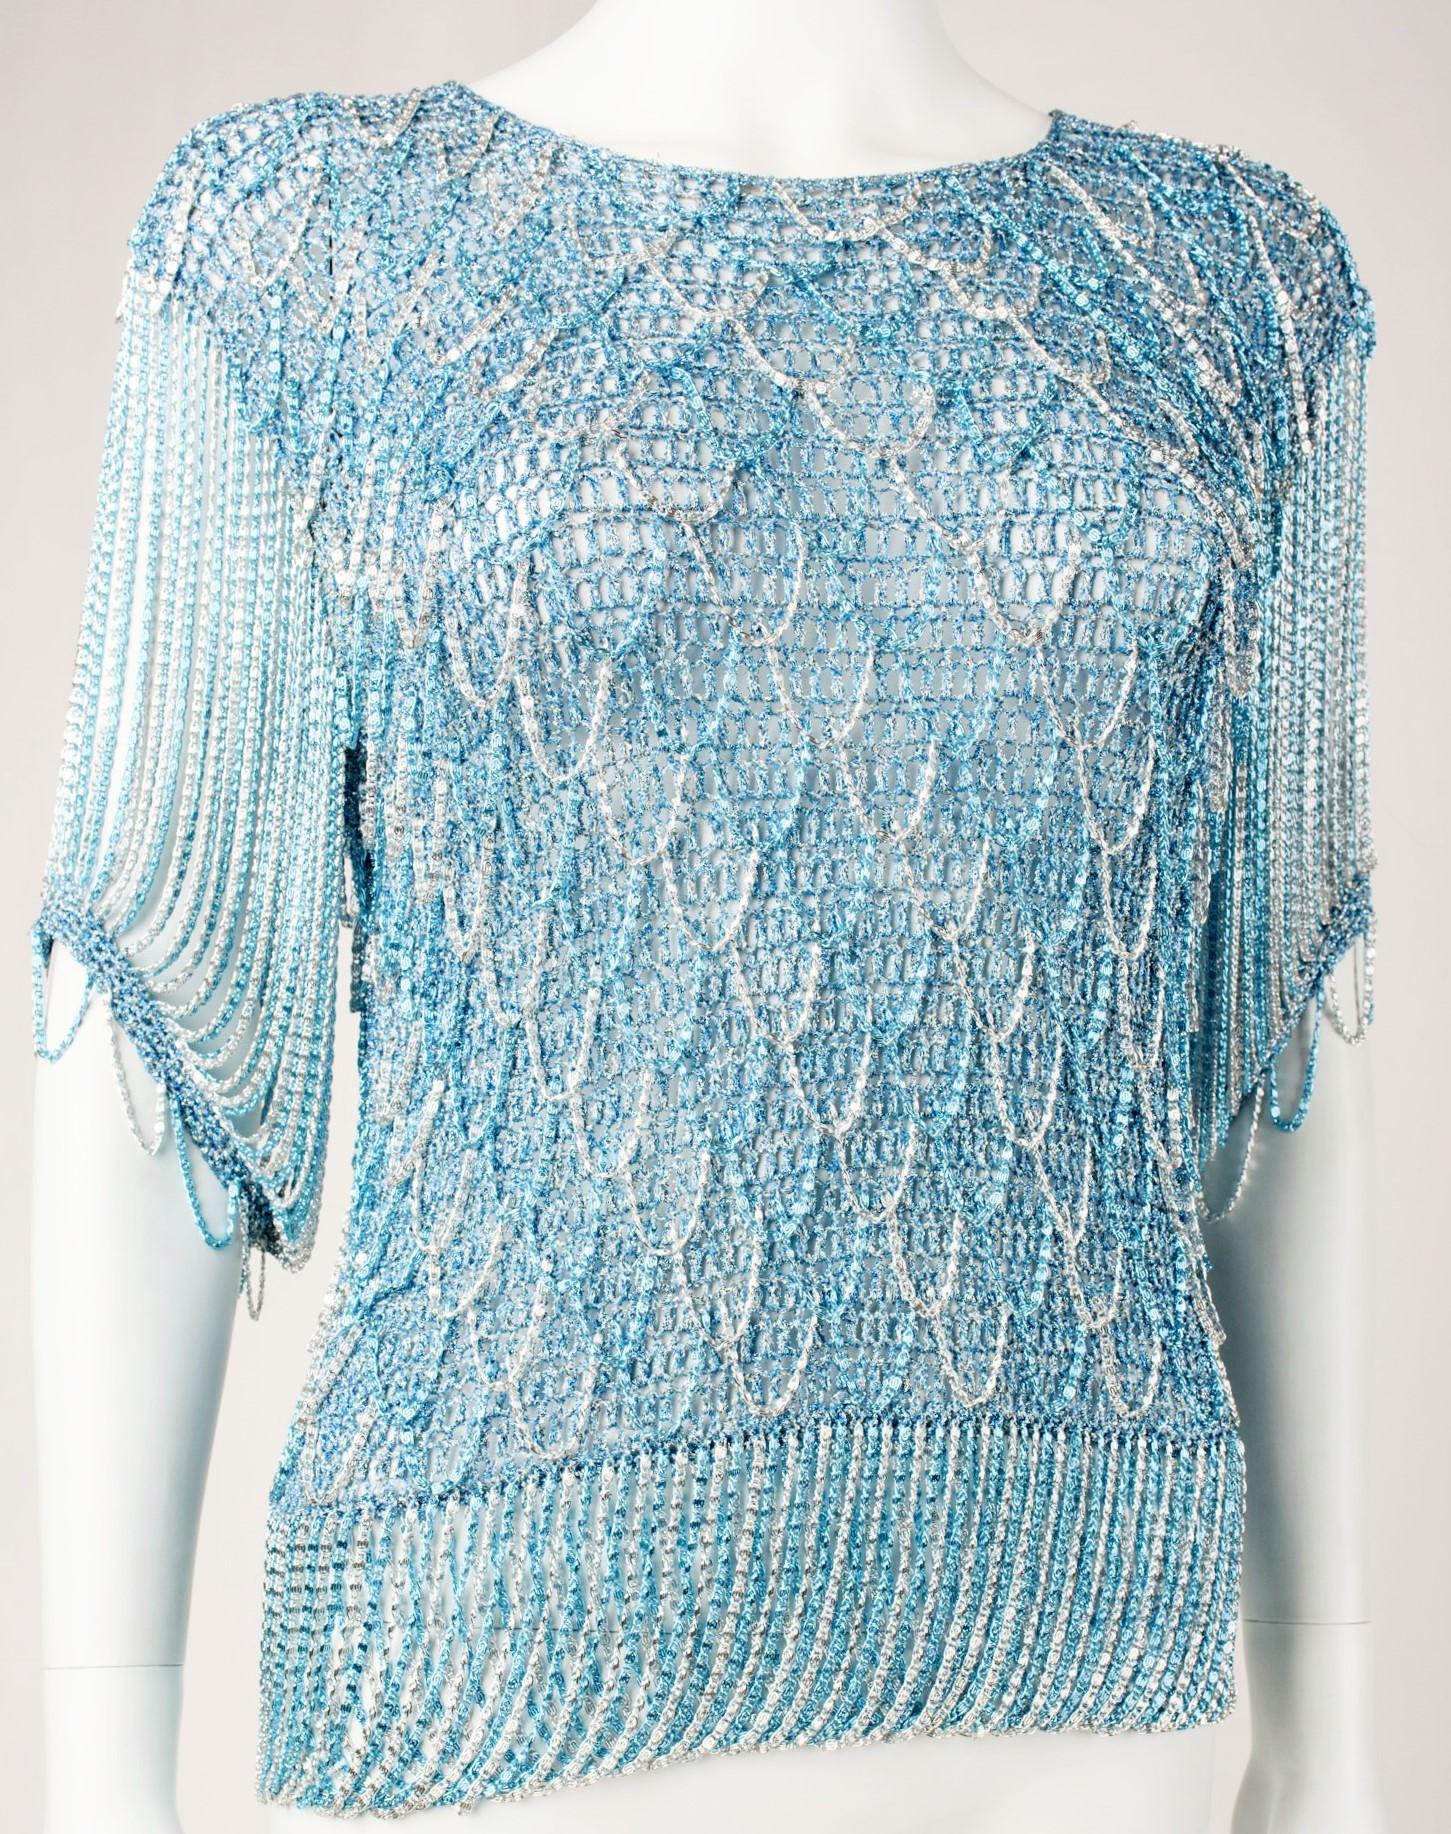 Circa 1970
France

Top by Loris Azzaro in Lurex knit and chain blue and silver dating from the period of the Parisian Music-Hall in the 1970s. Top with boat neckline closed behind by a snap. Knitted lurex bottom, embroidered with metallic chains